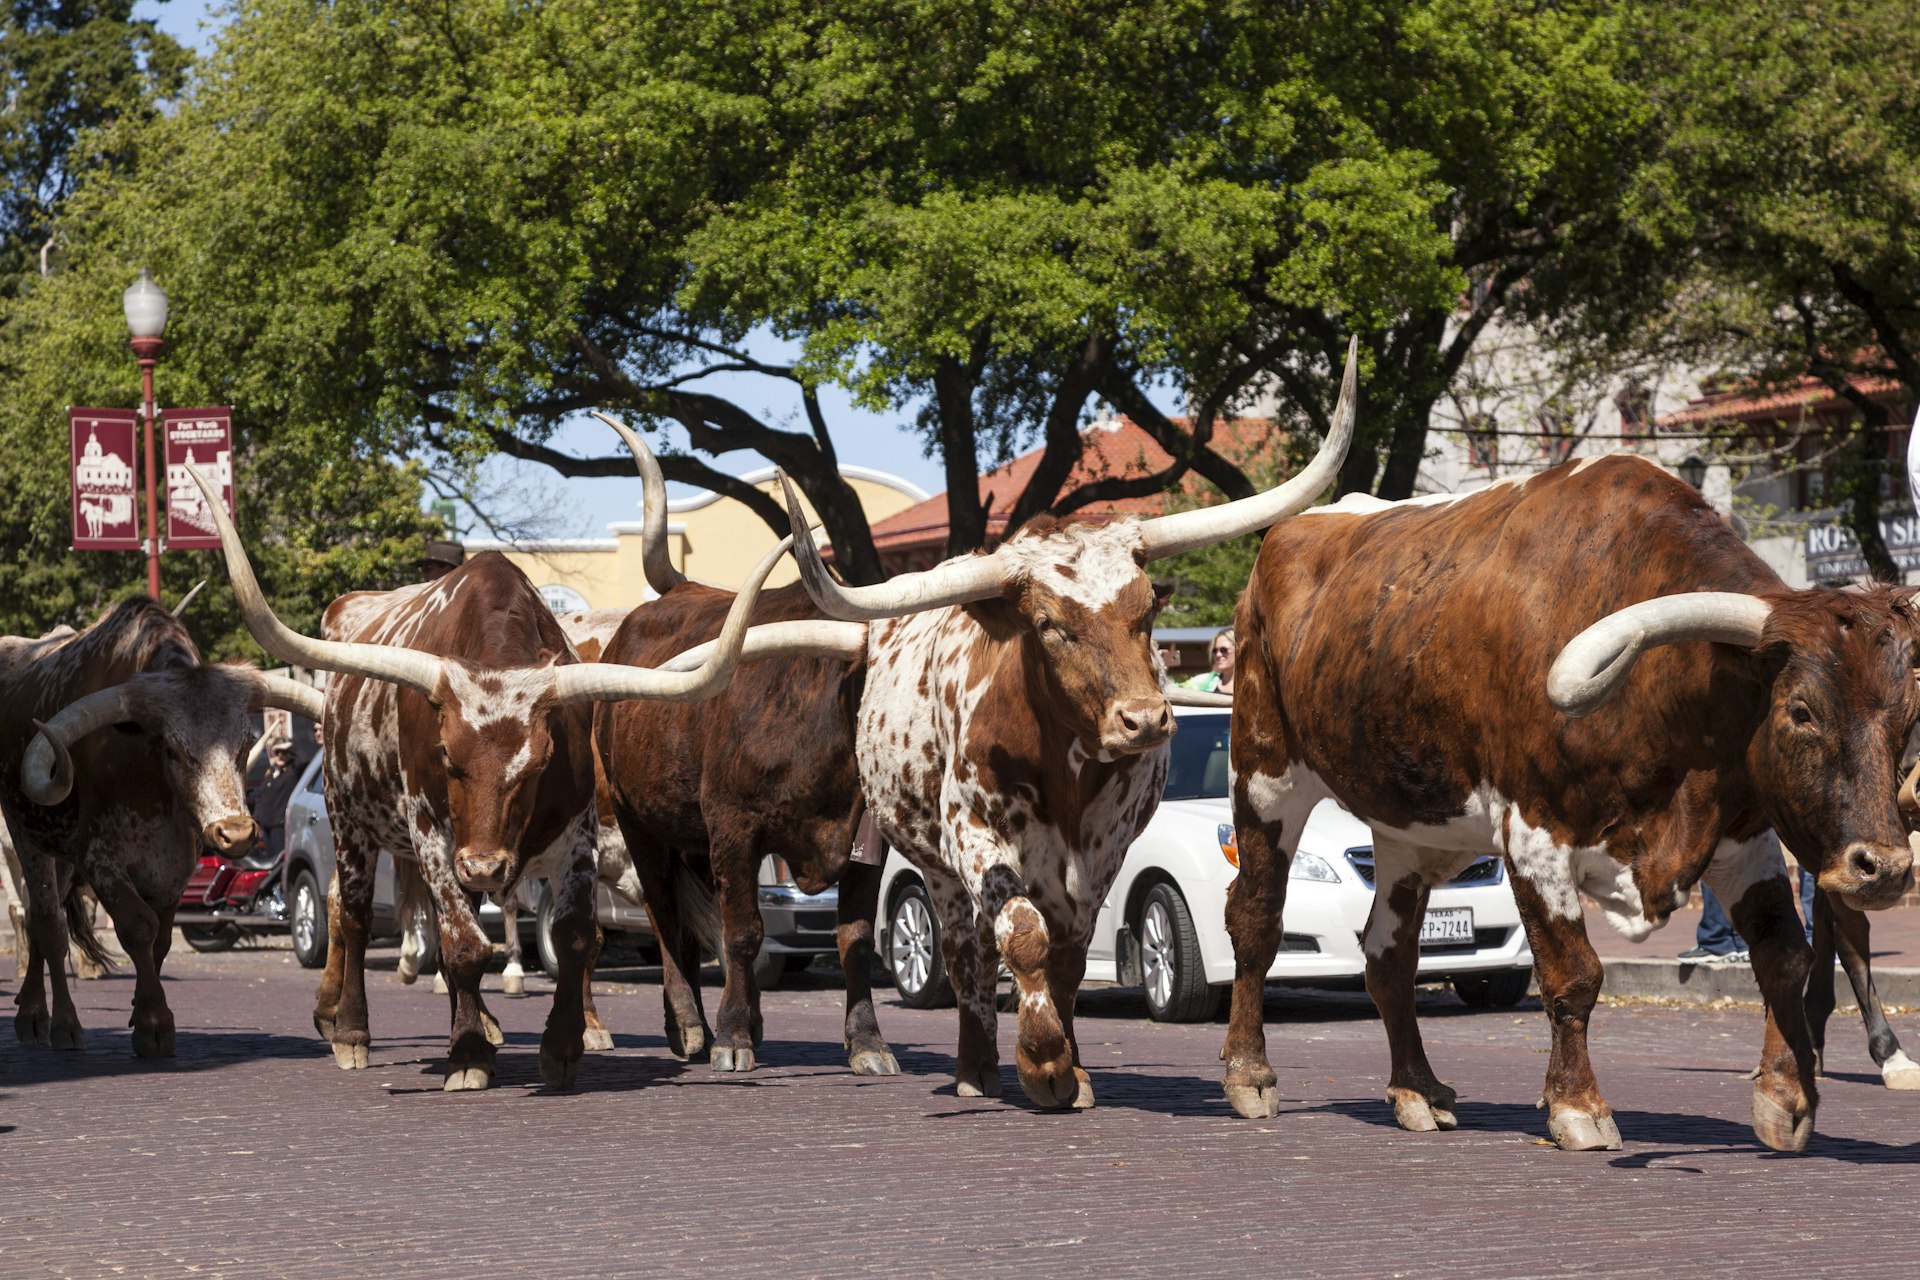 Cattle on the street at the Forth Worth Stockyards